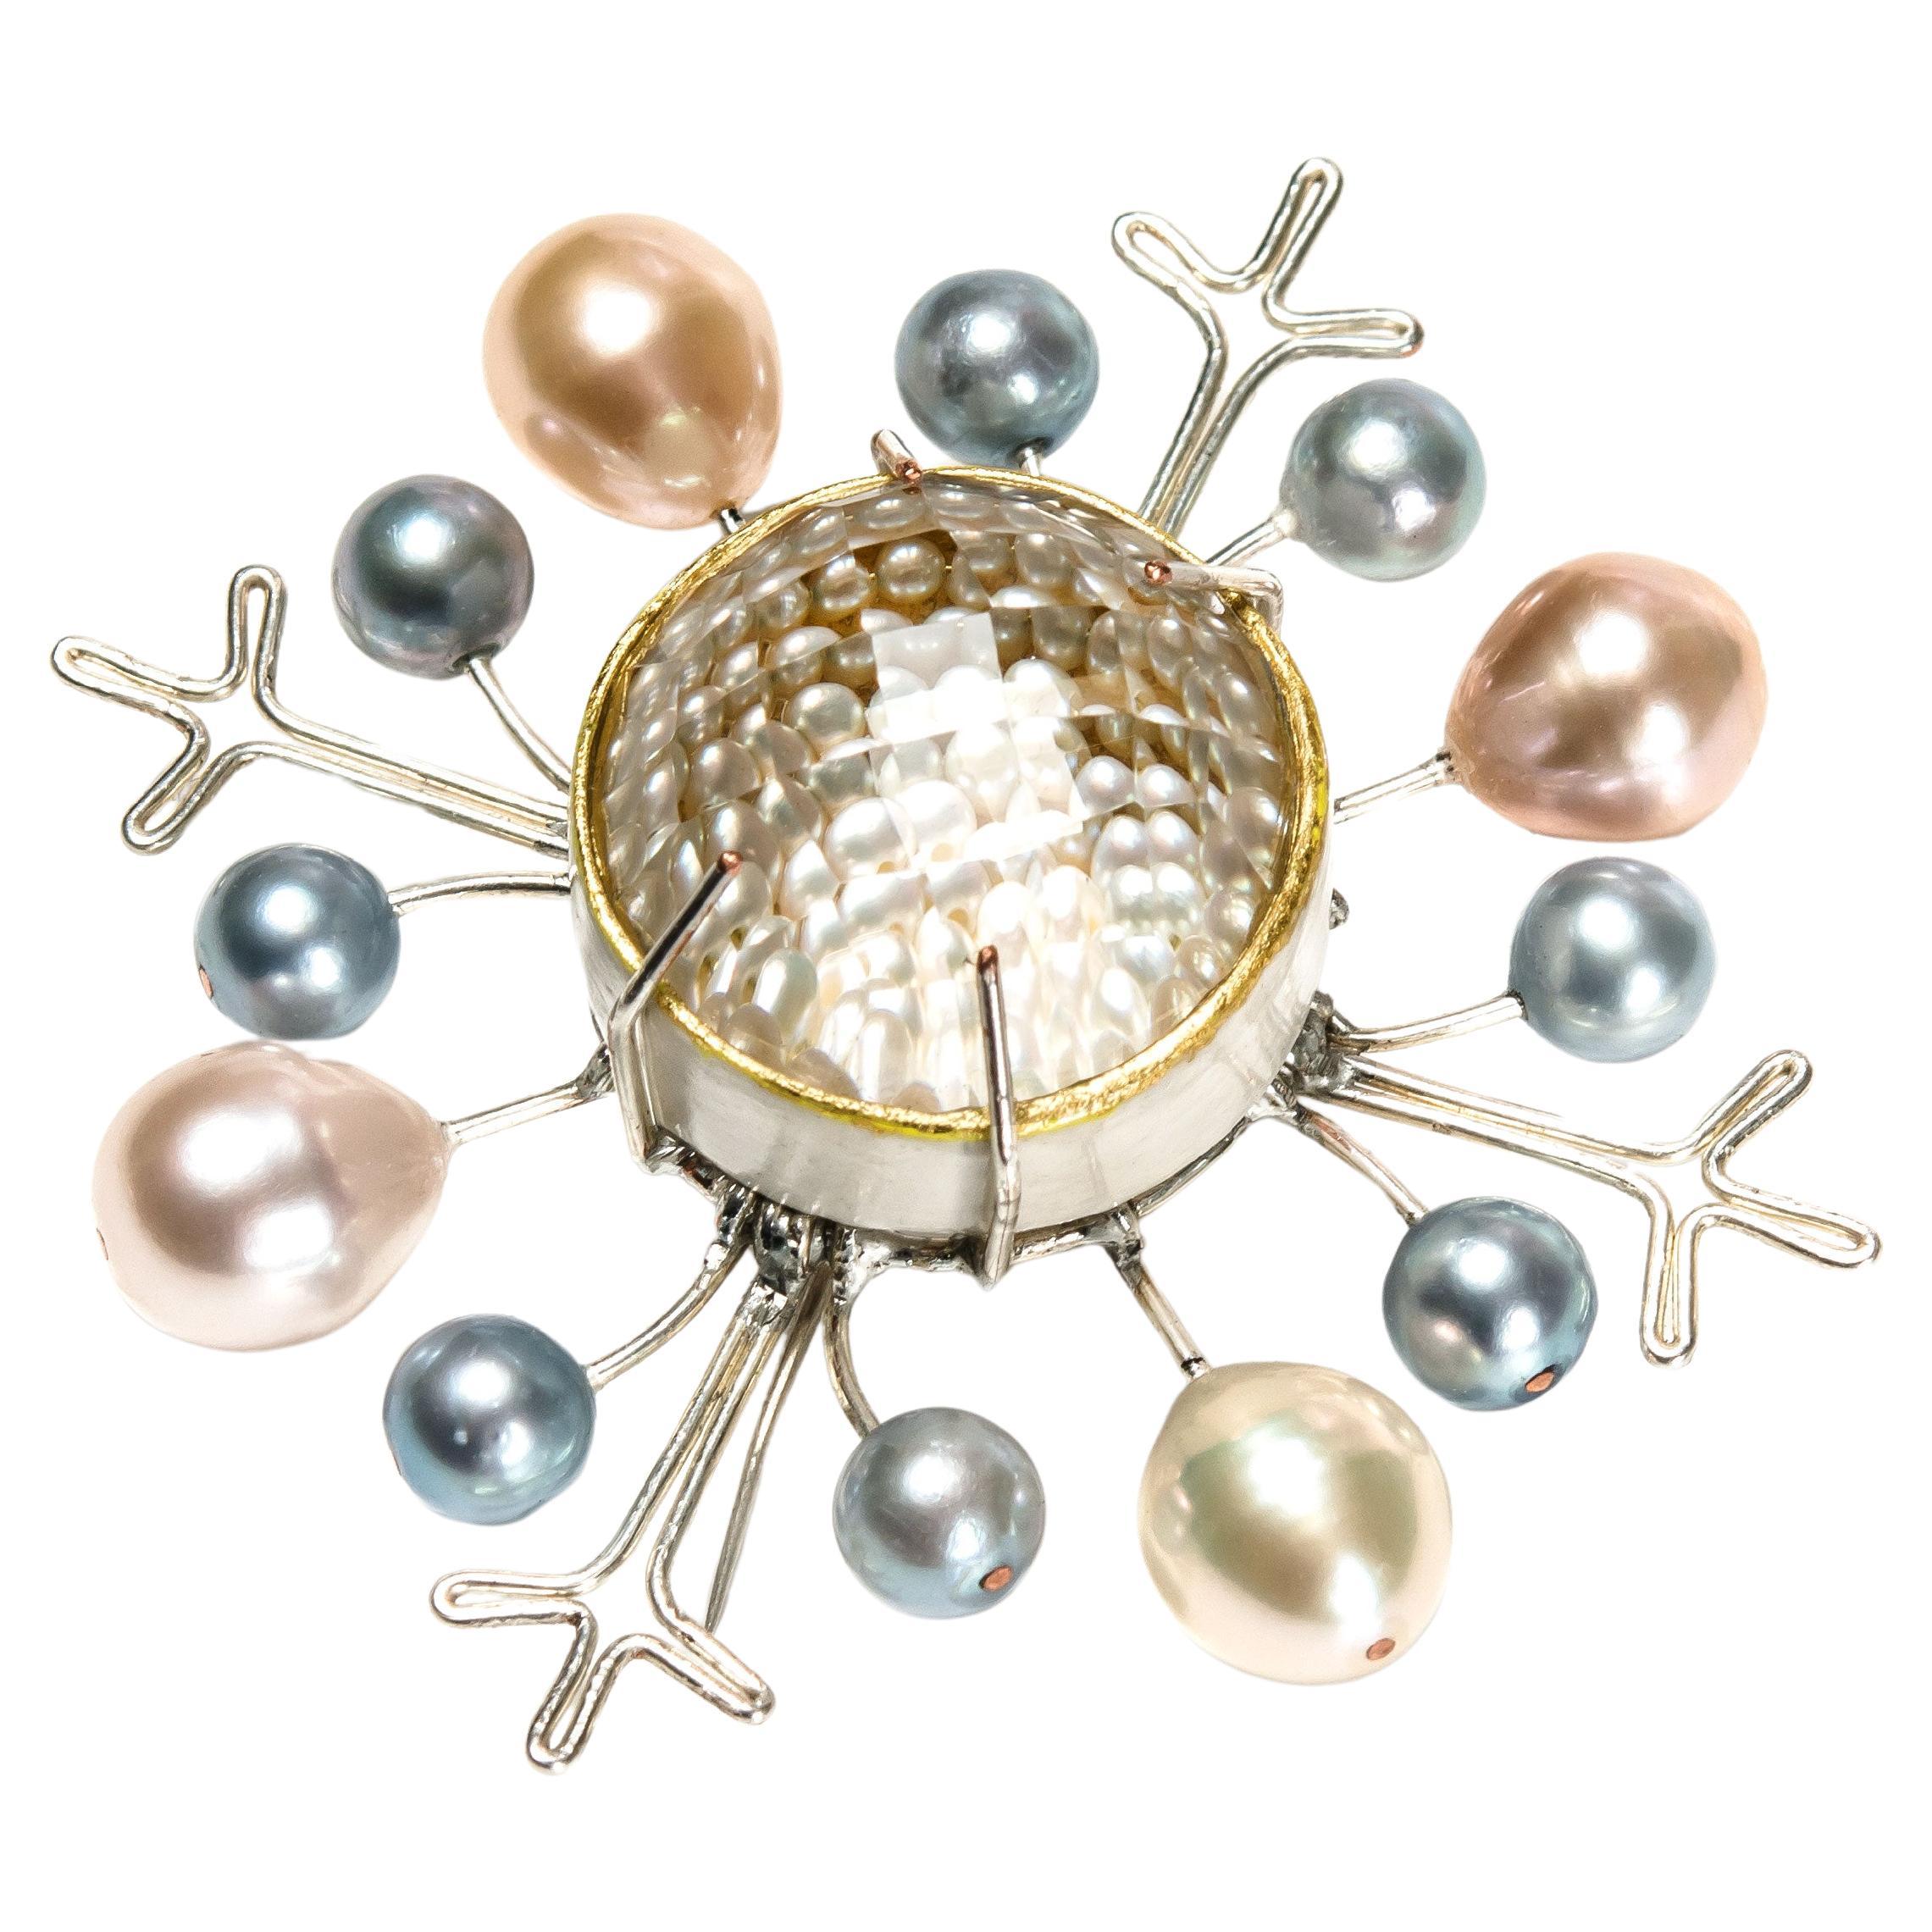 Bodyfurnitures Brooch: Transparency View Rock Crystal with Pearls, Silver